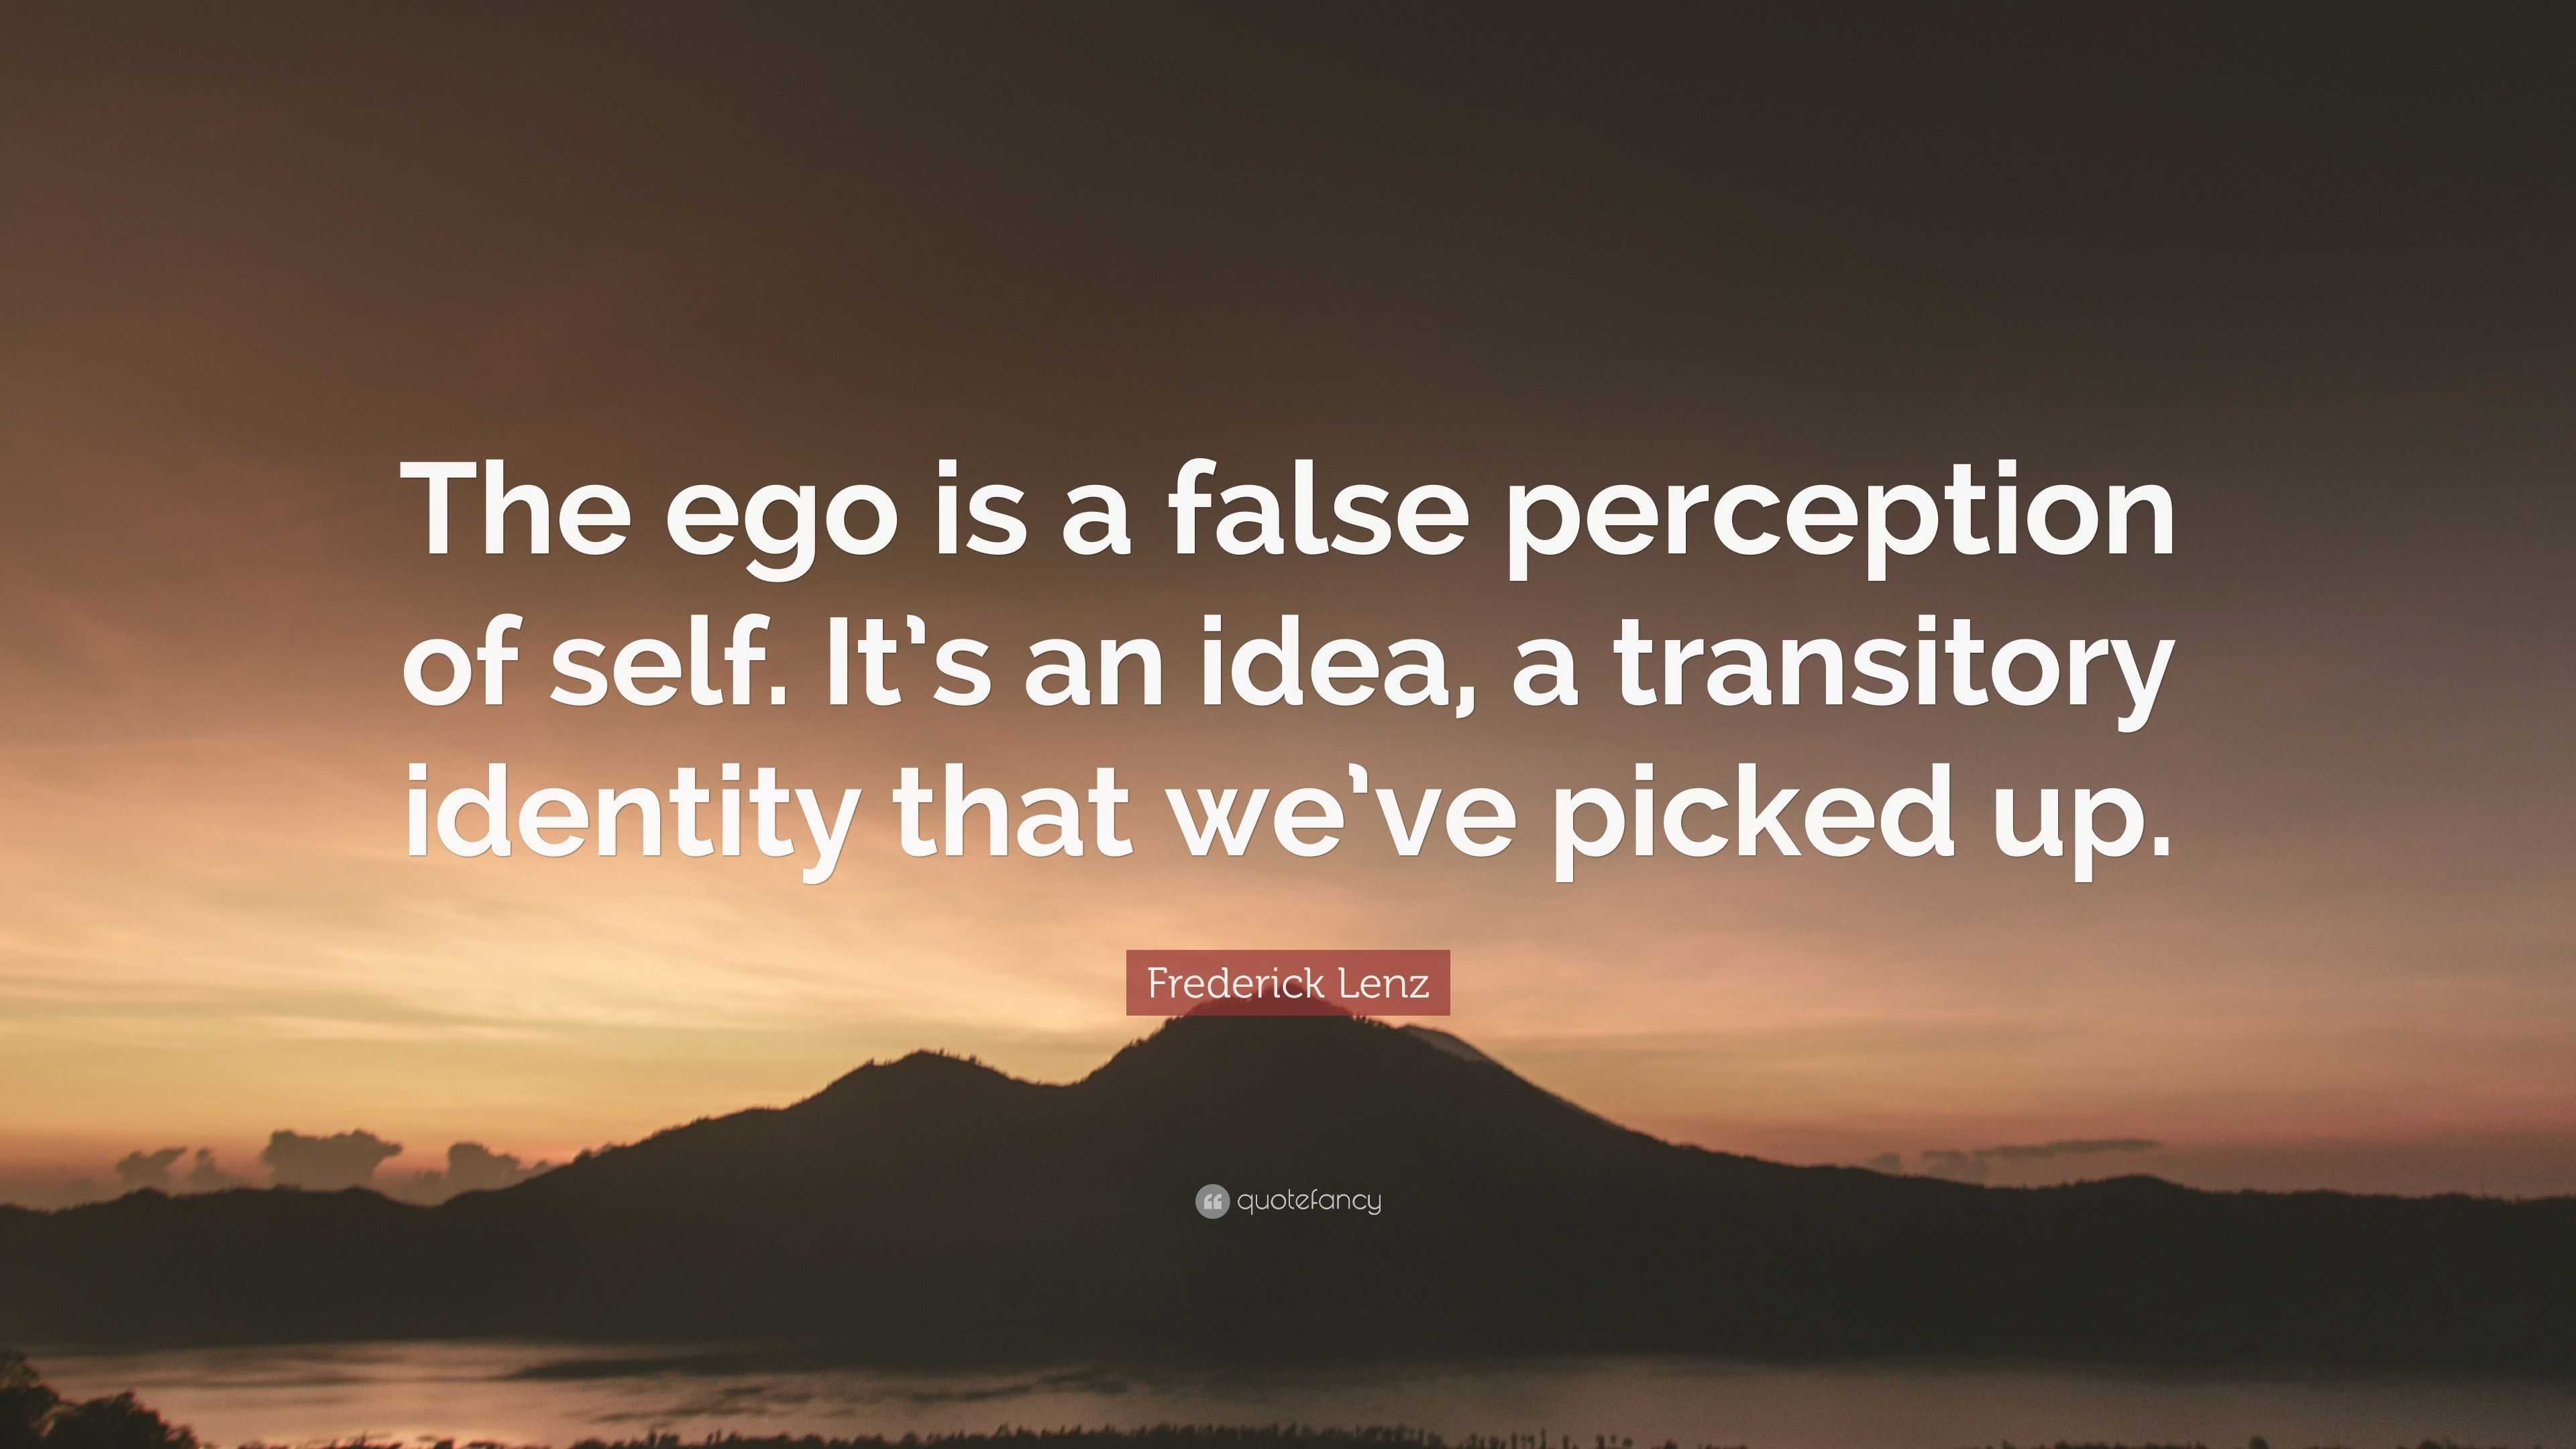 Frederick Lenz Quote: “The ego is a false perception of self. It’s an ...